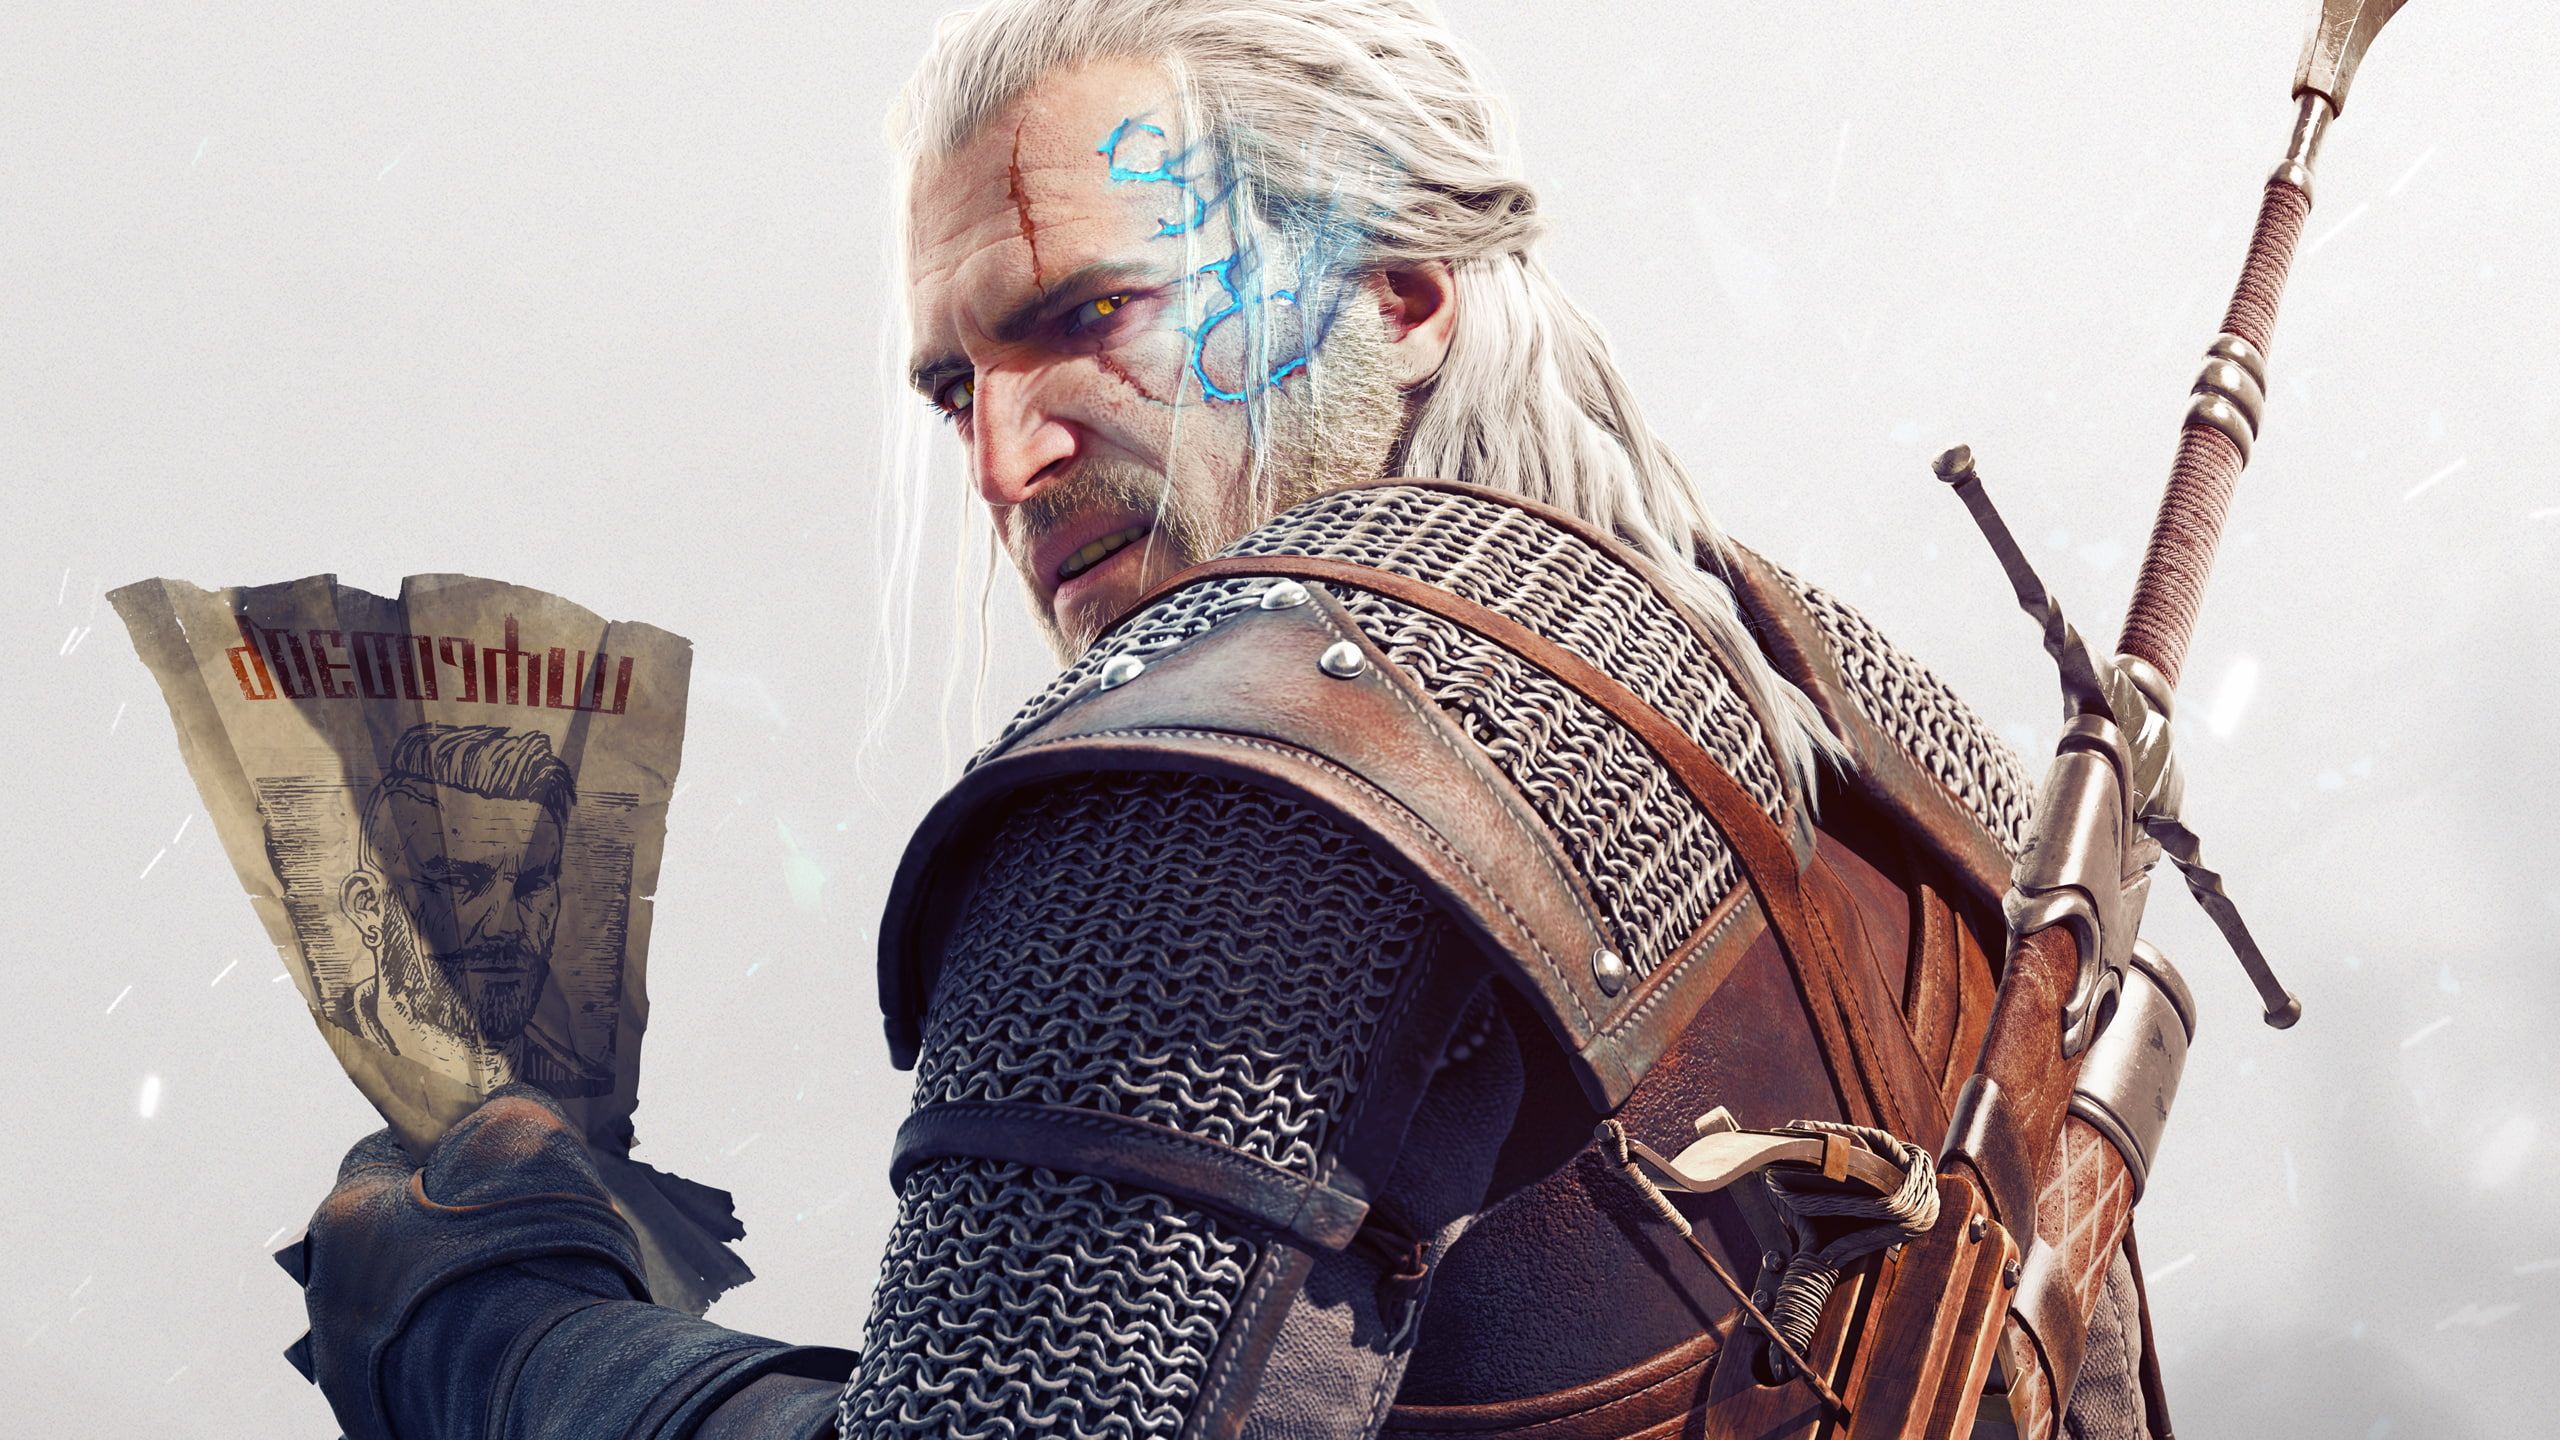 Witcher 3 Hearts Of Stone Wallpapers